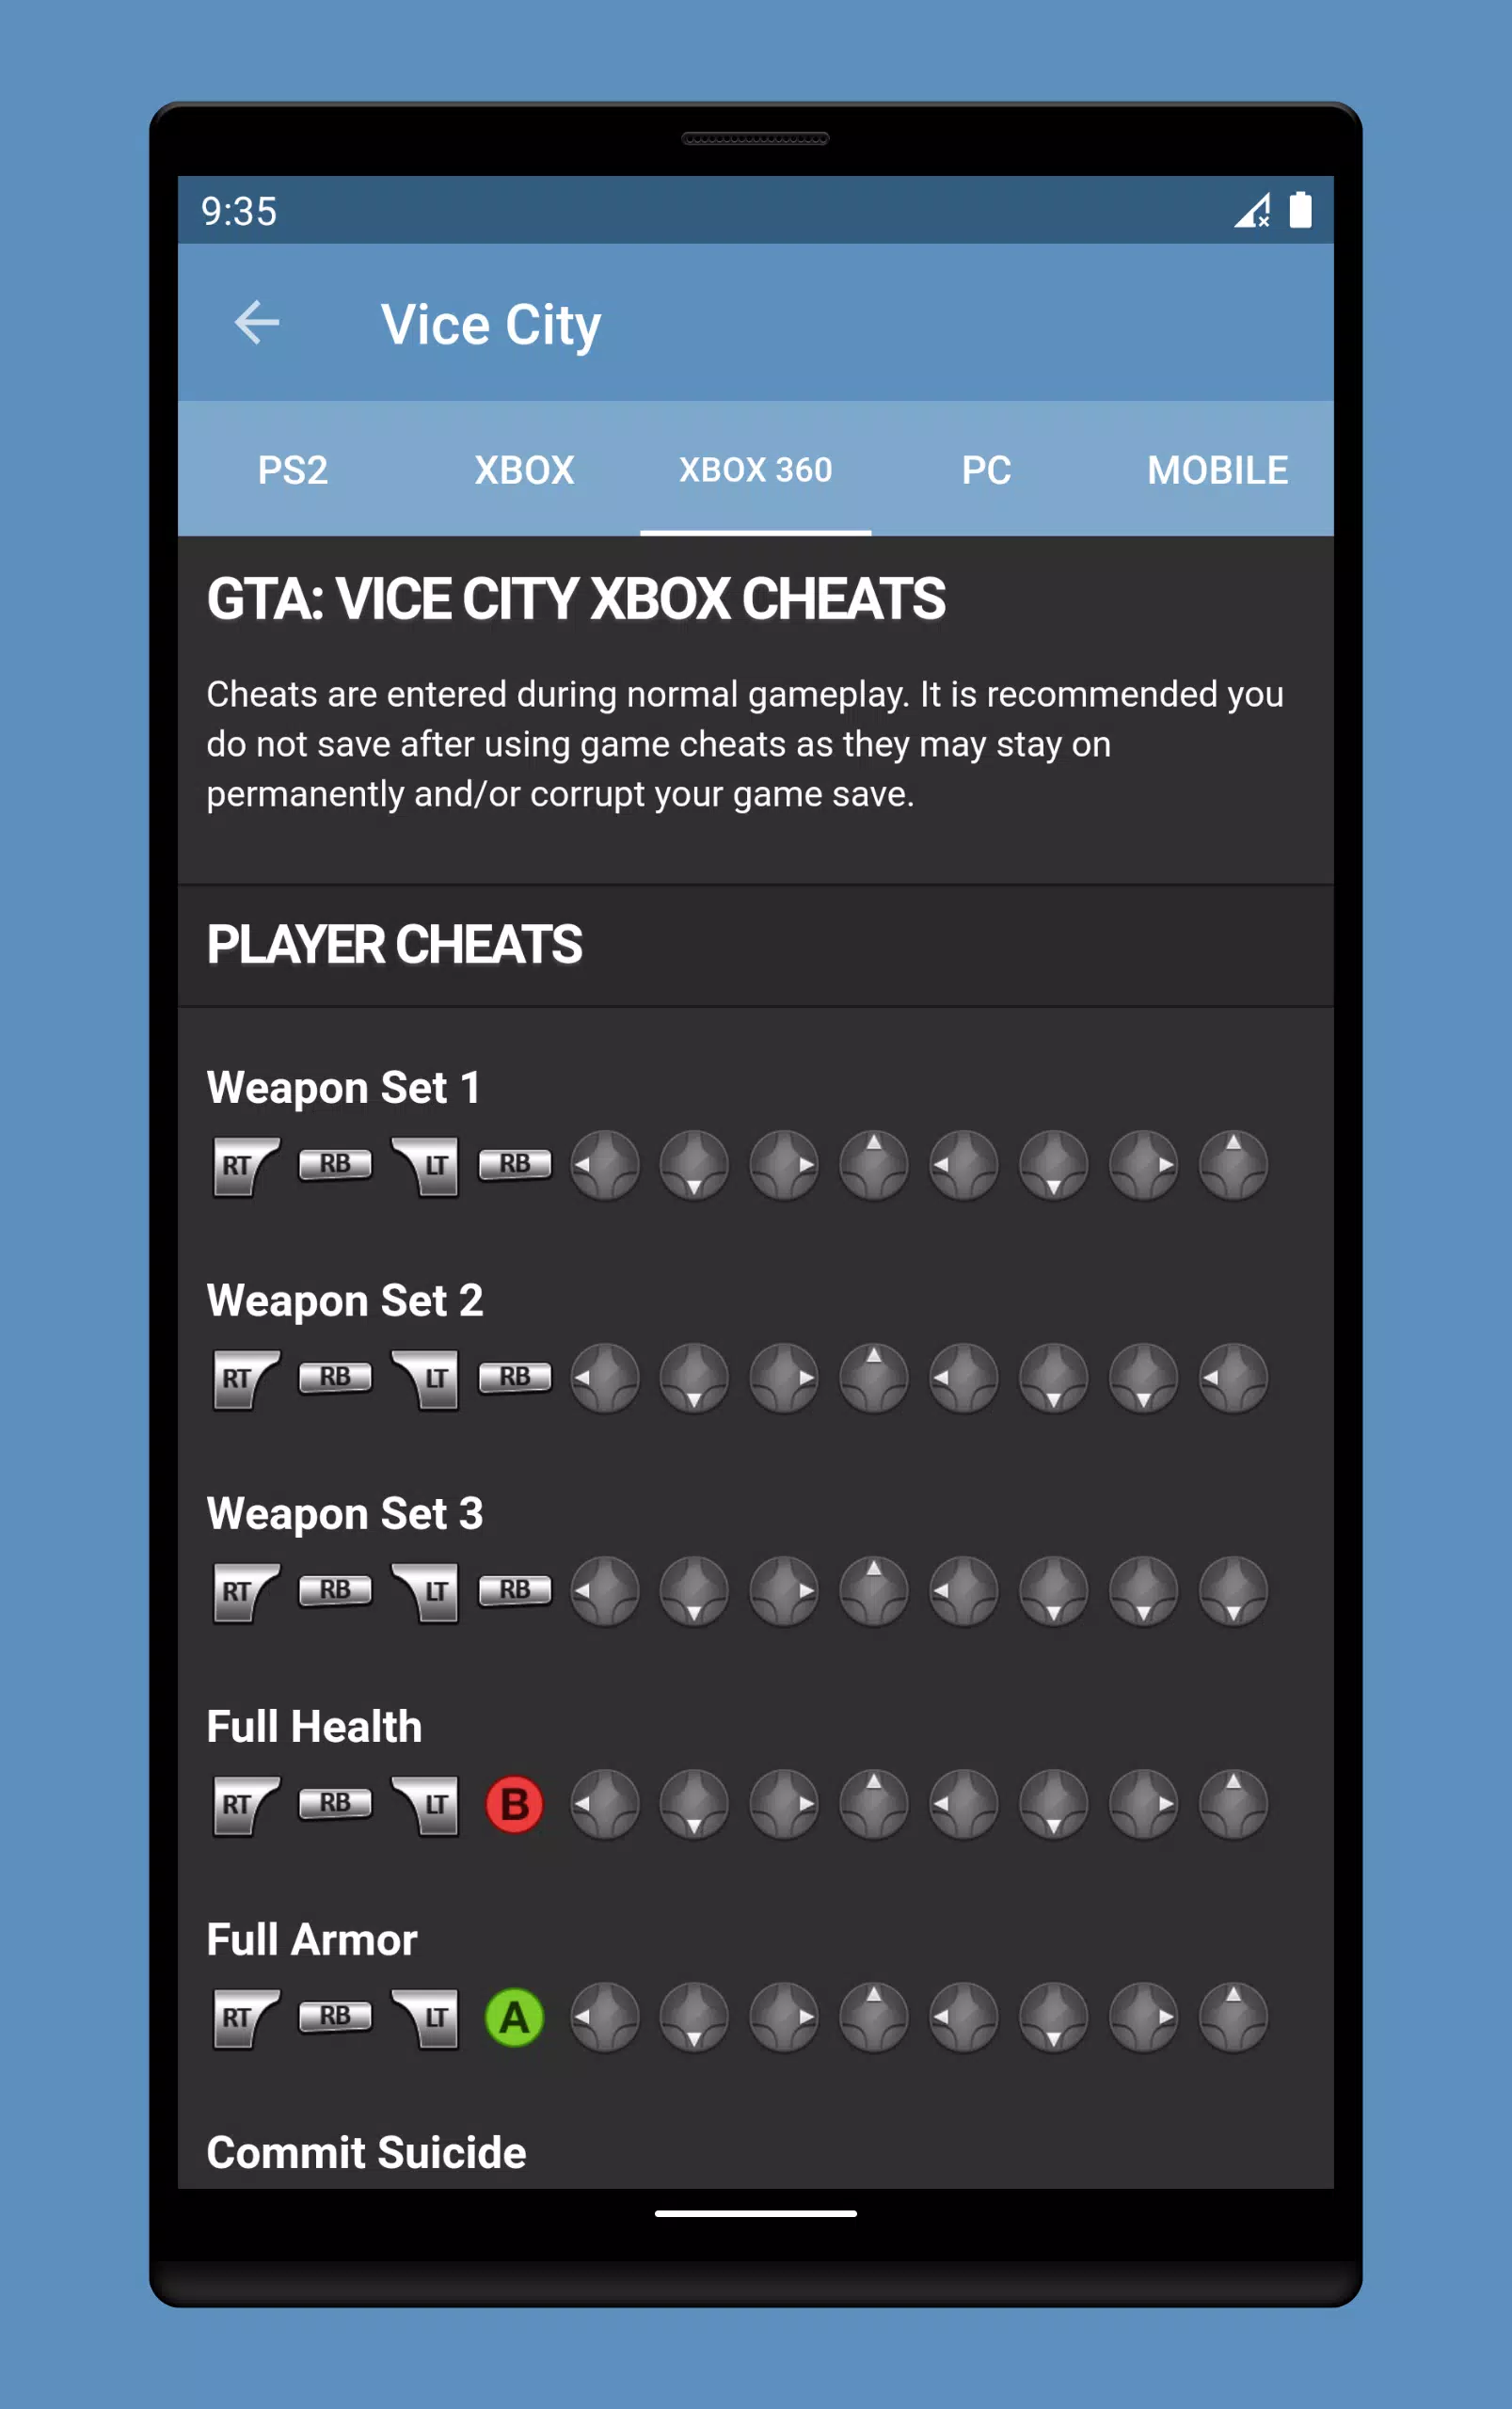 GTA Vice City Cheat codes for PS4, PC, and Xbox